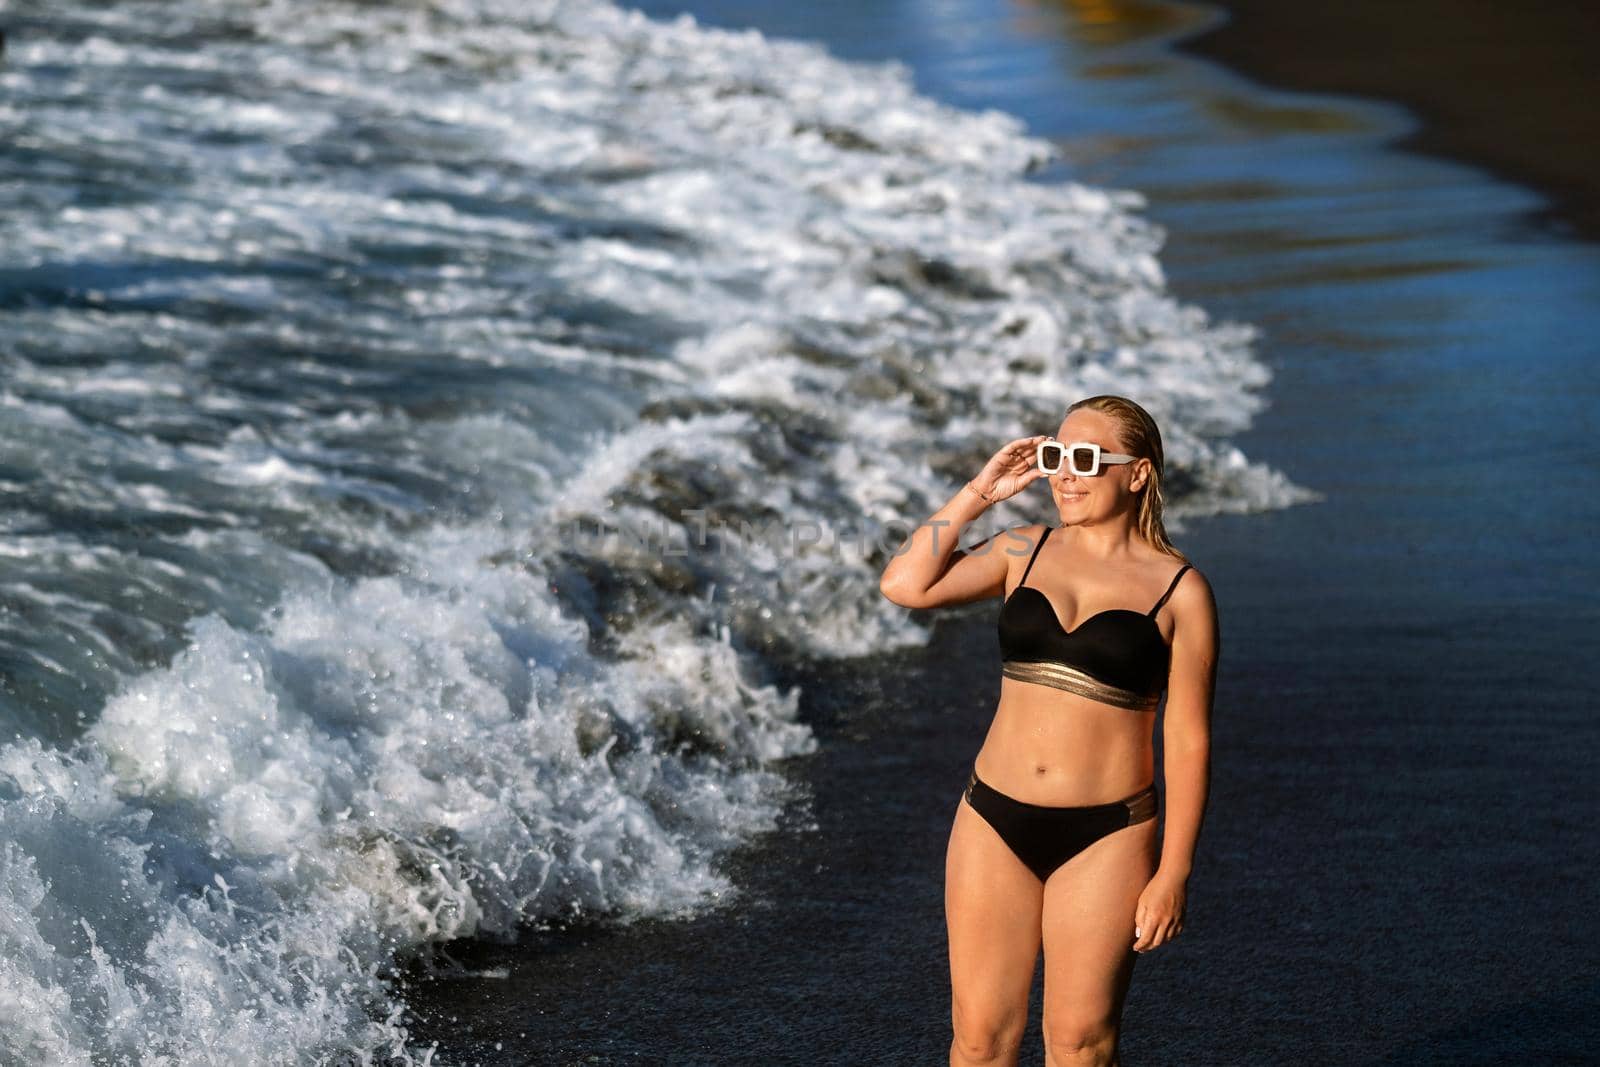 A girl in a black swimsuit walks on the beach on the island of Tenerife in the Atlantic Ocean, Spain.